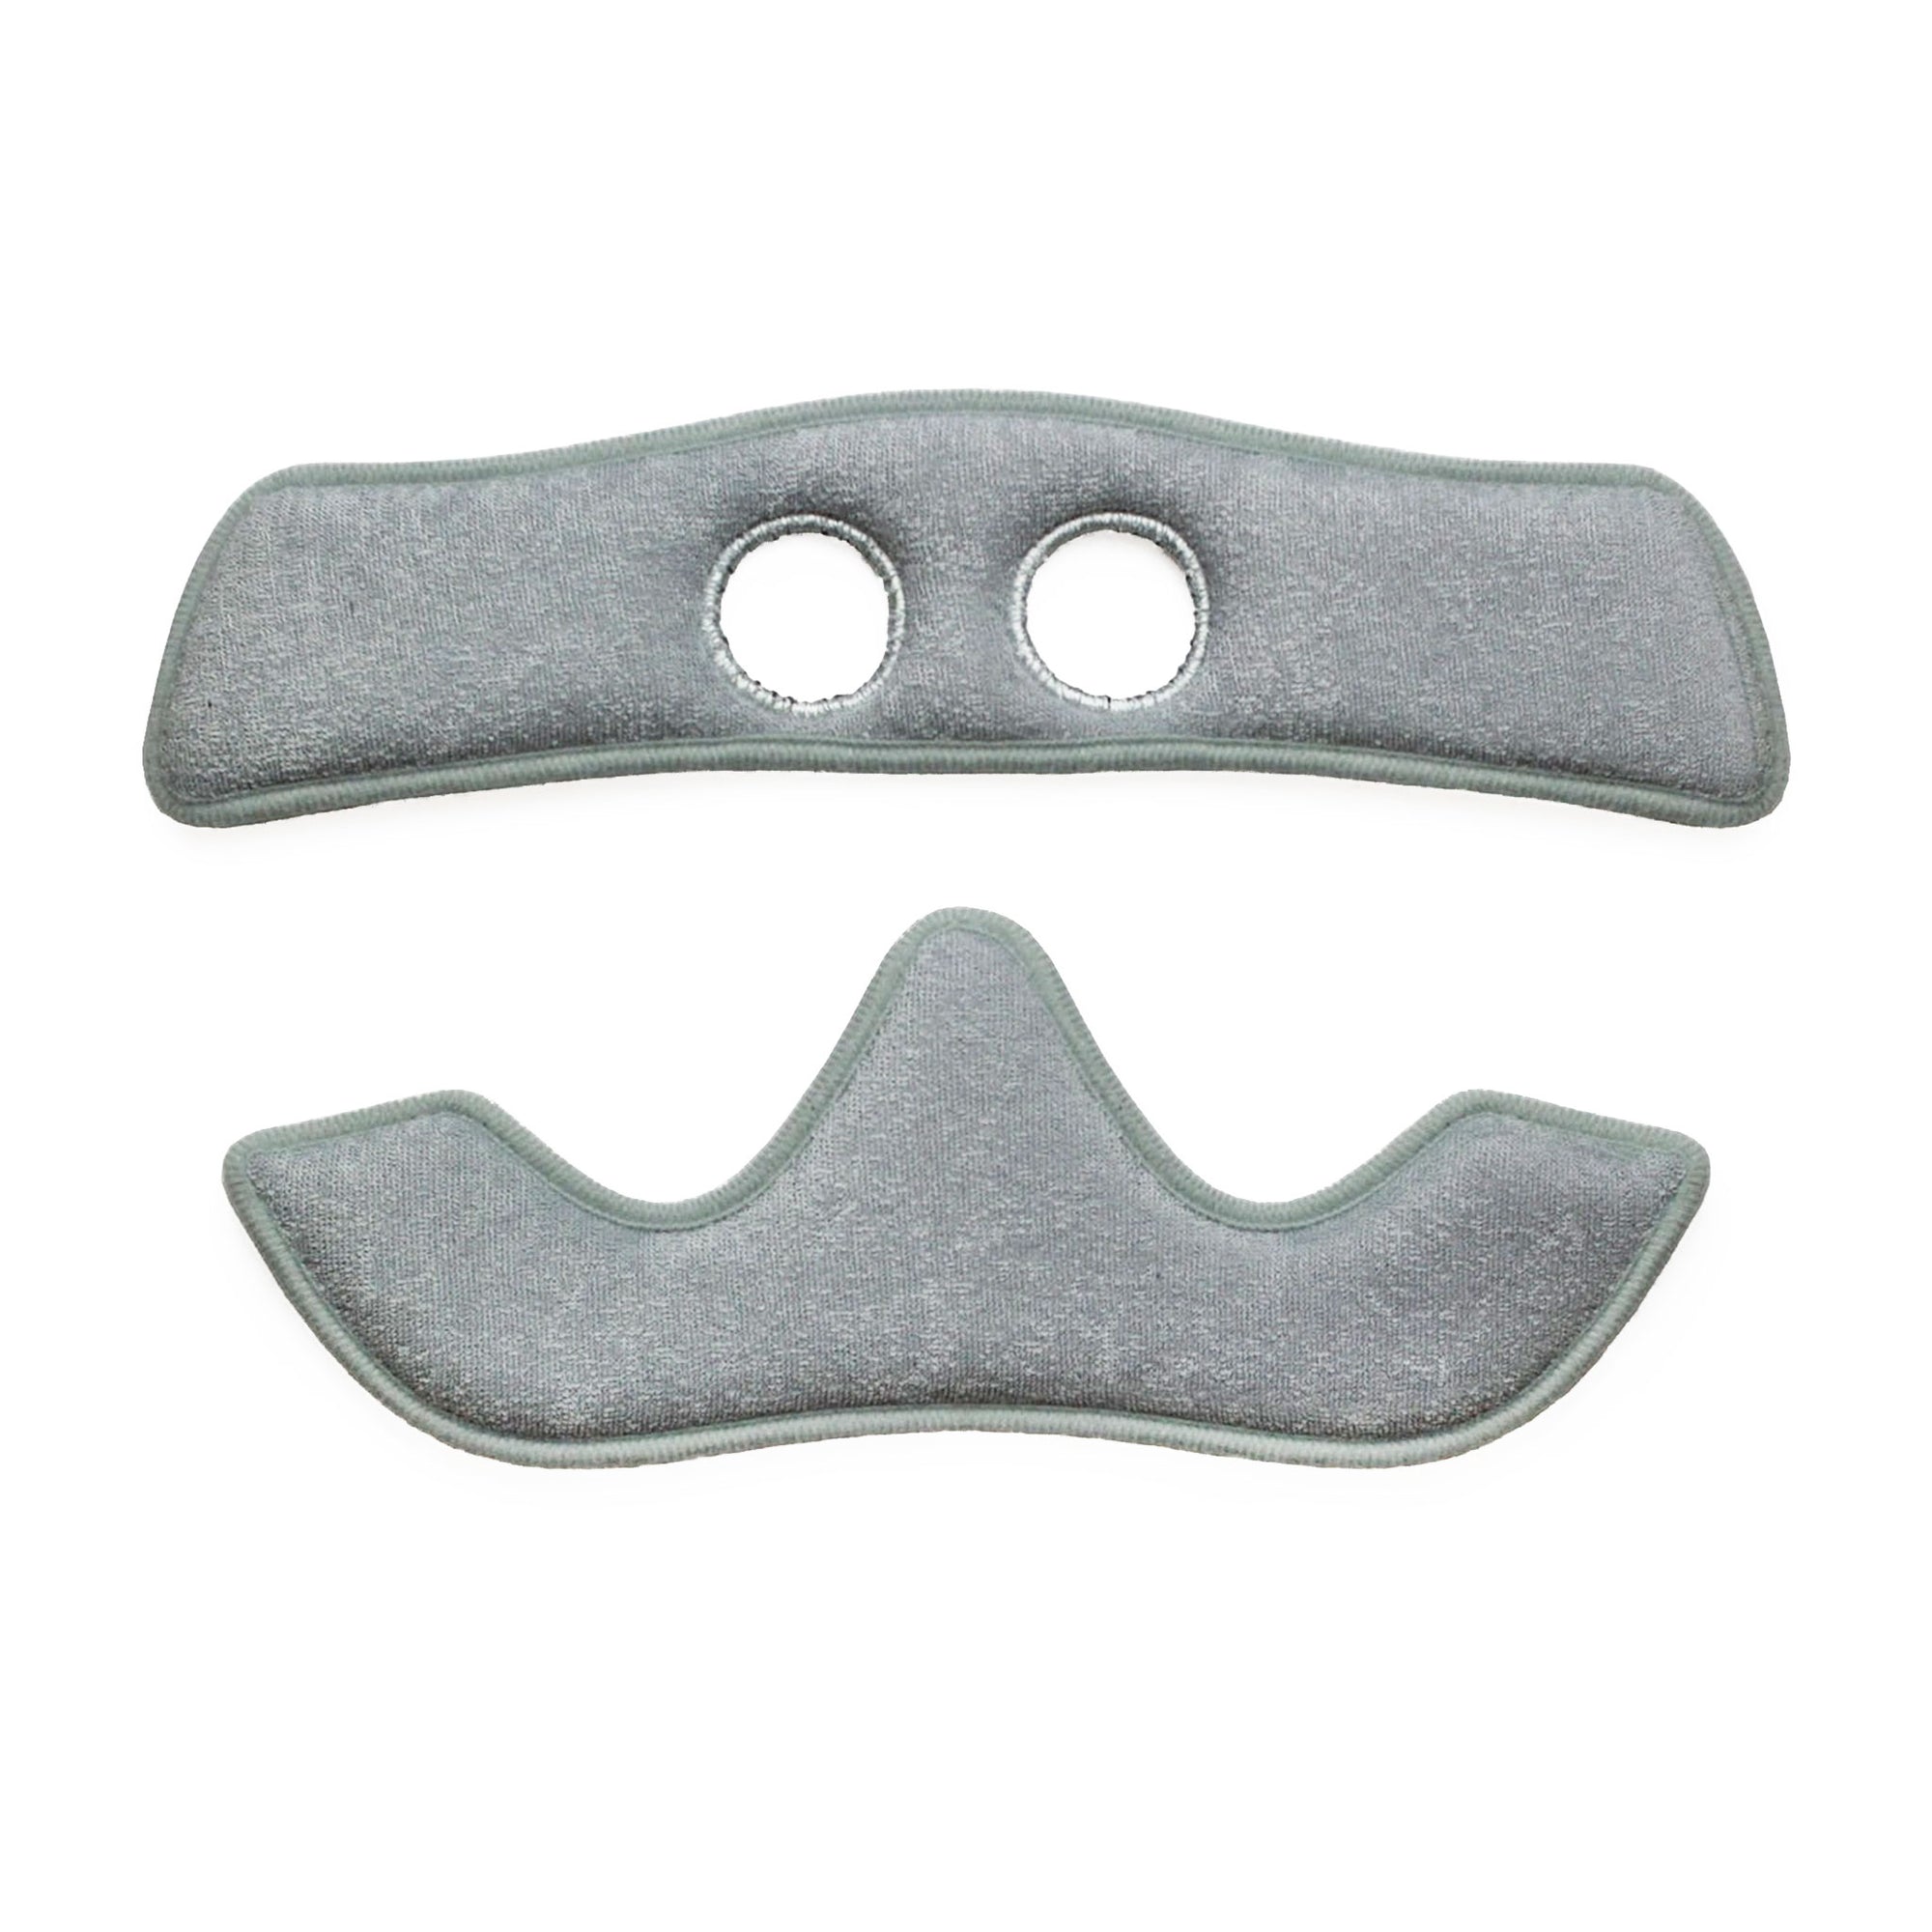 S-One Lifer Wide Terry Cloth Replacement Liner - Grey Helmet liners